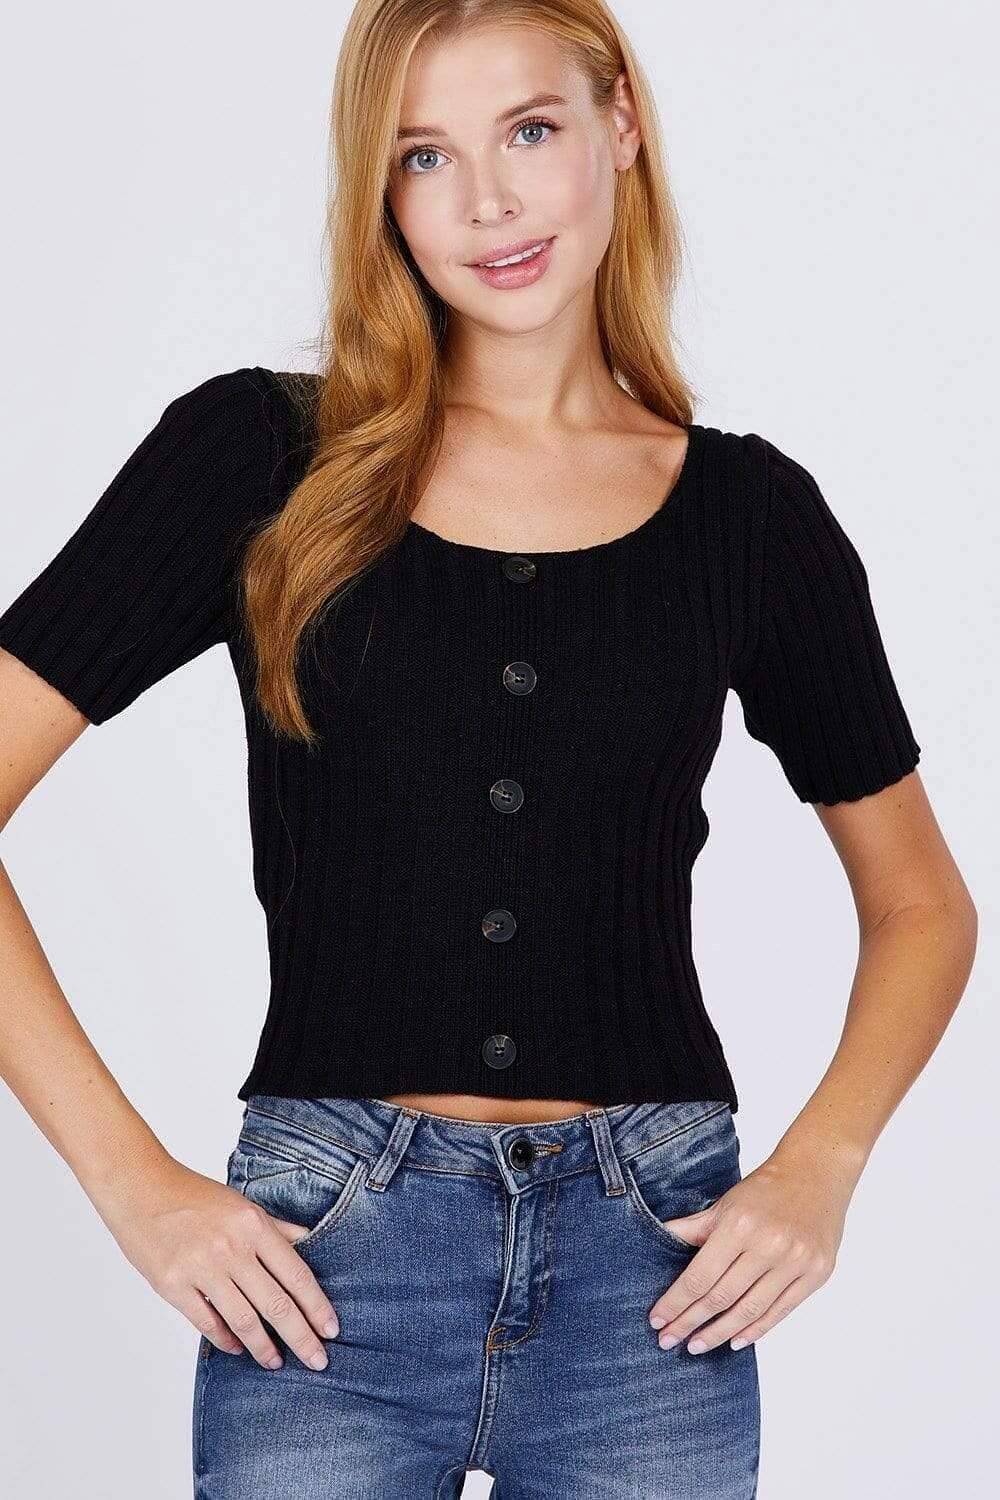 Black Short Sleeve Rib Knitted Sweater - Shopping Therapy S Top